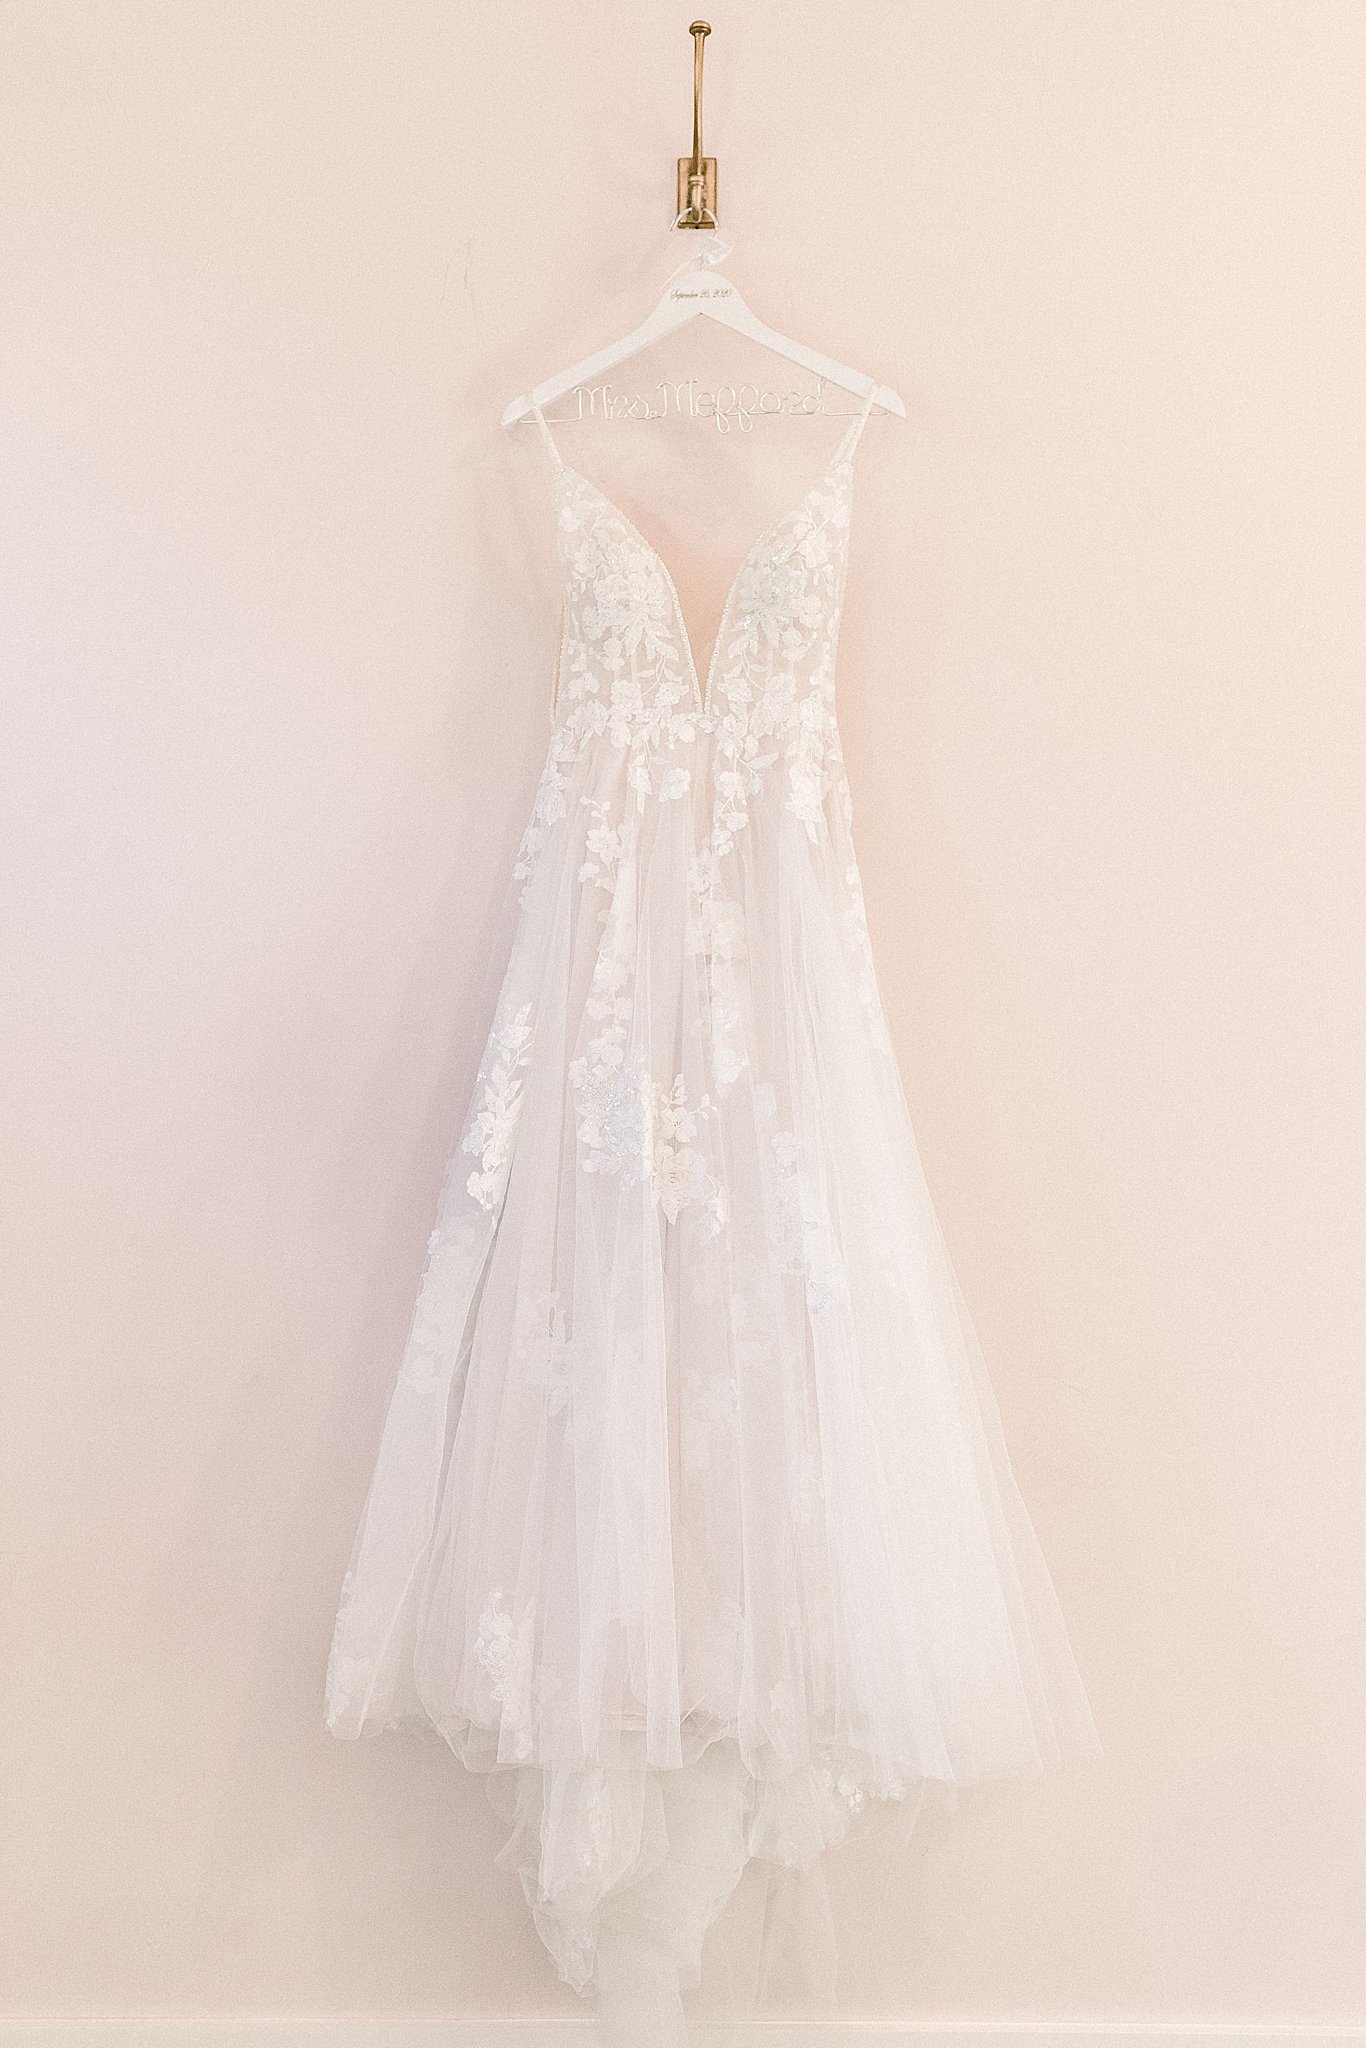 Wedding Gown at Hayes Hollow, Spring Branch Wedding Venue, Anna Kay Photography